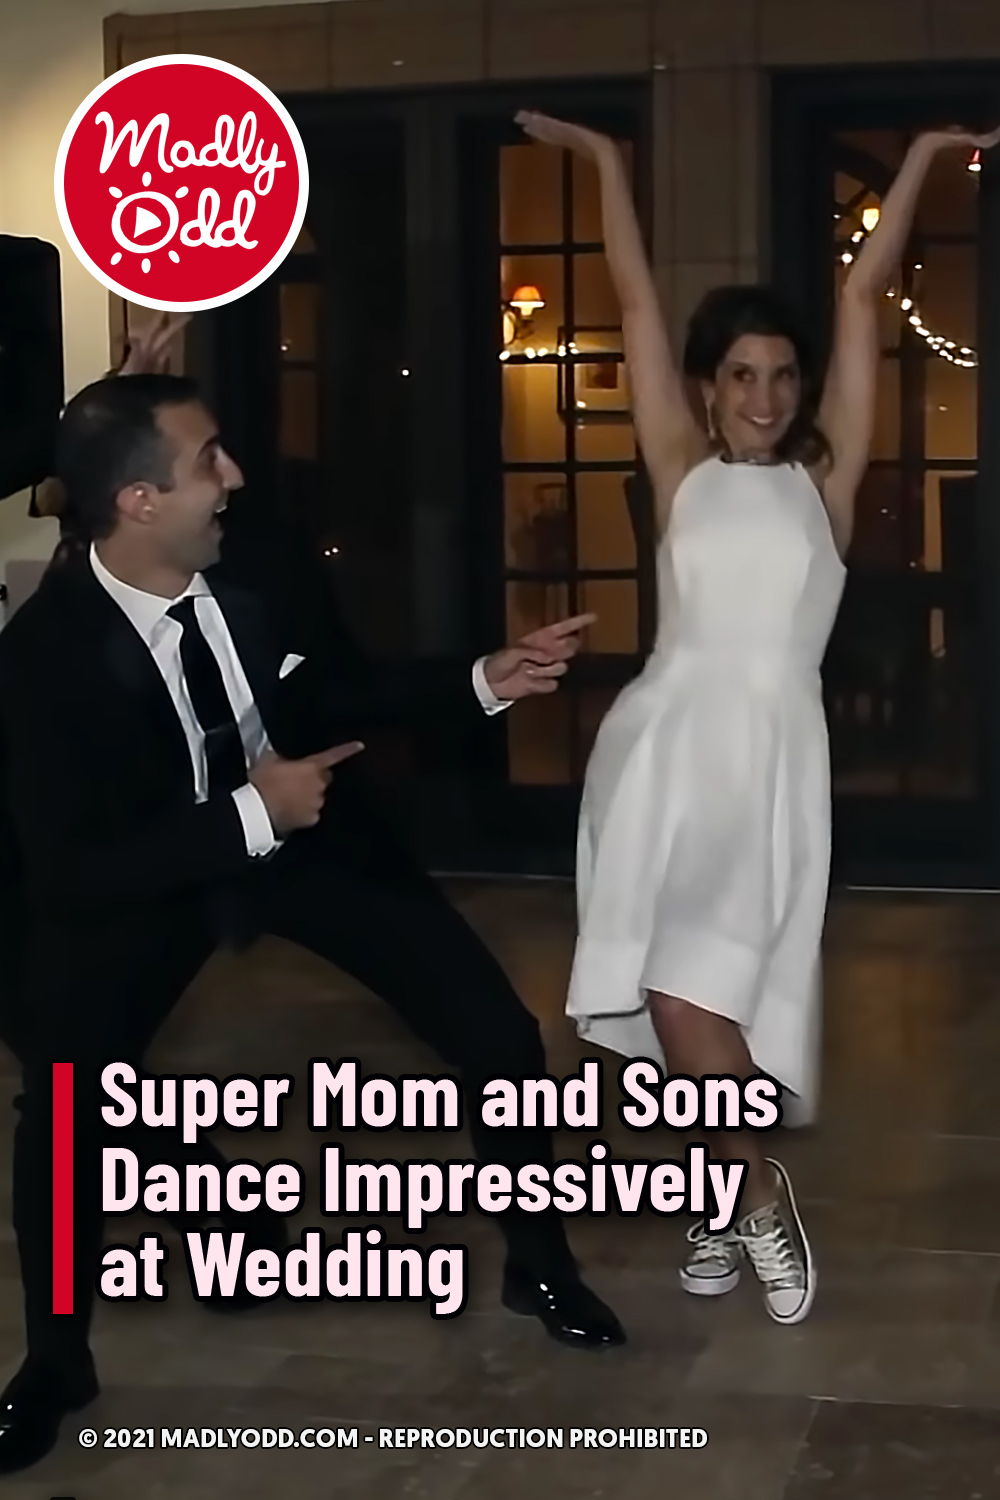 Super Mom and Sons Dance Impressively at Wedding